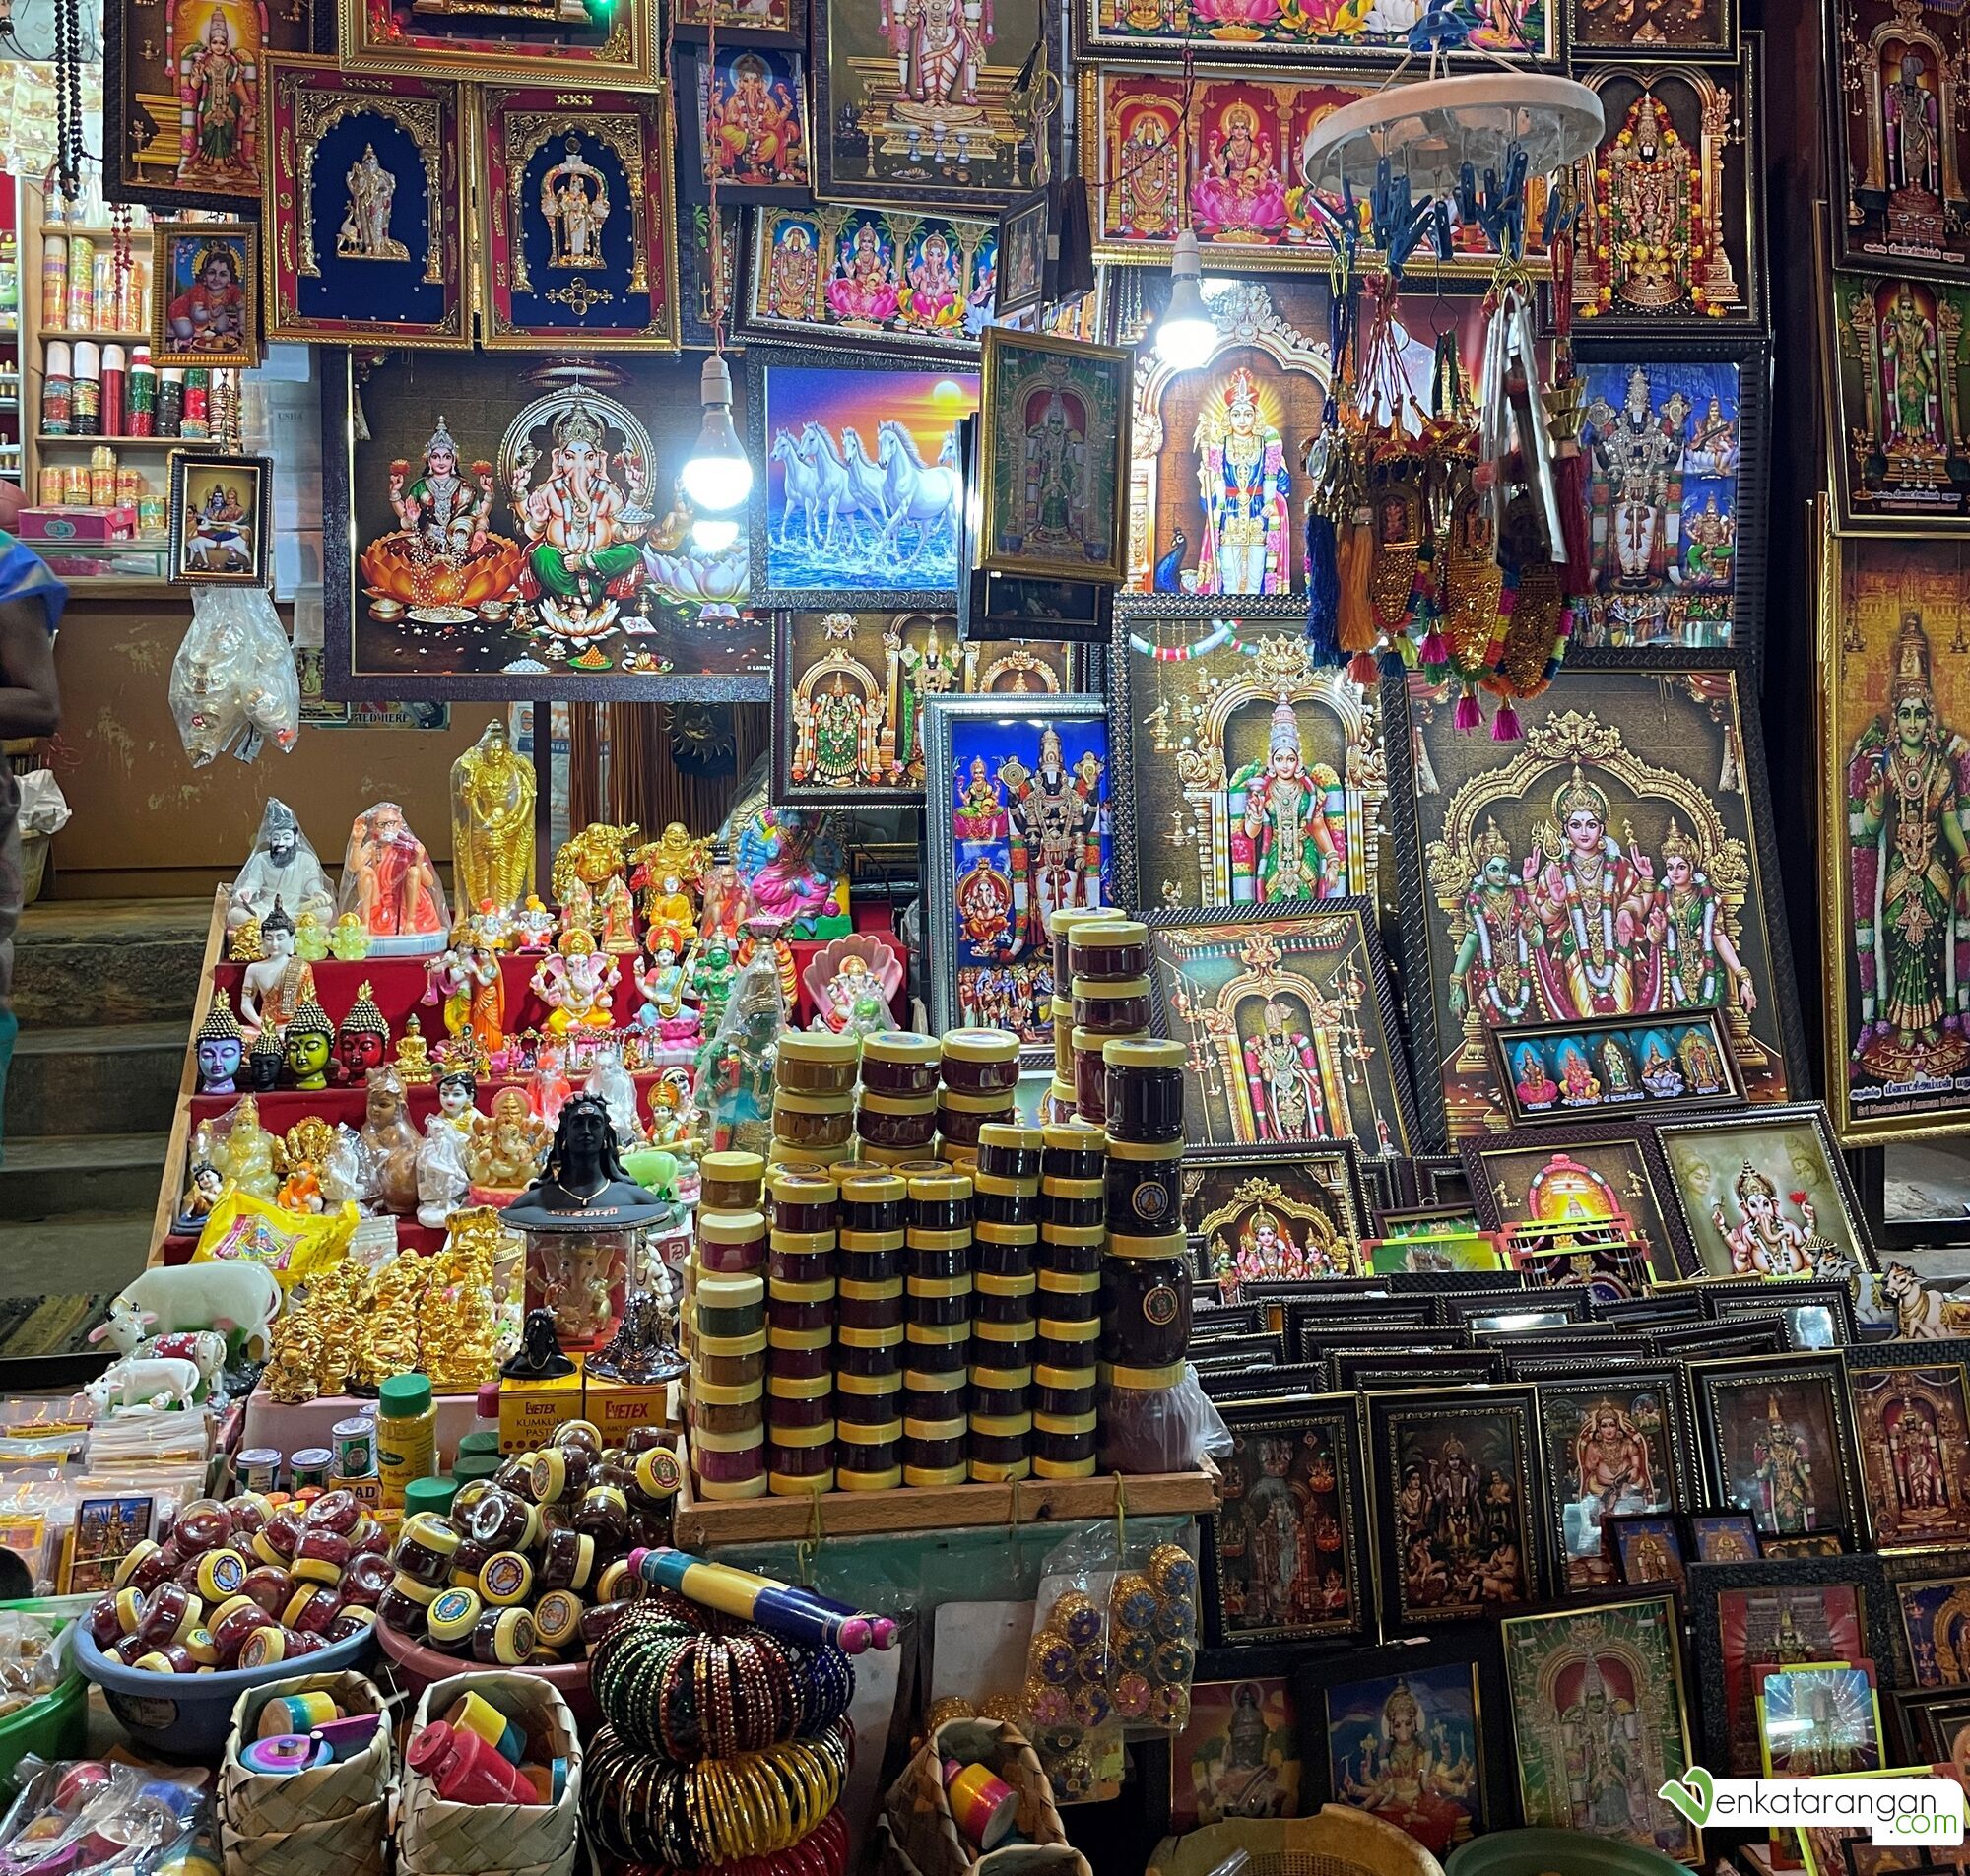 Shops near the temple sell picture frames of Goddess Meenakshi and other Gods